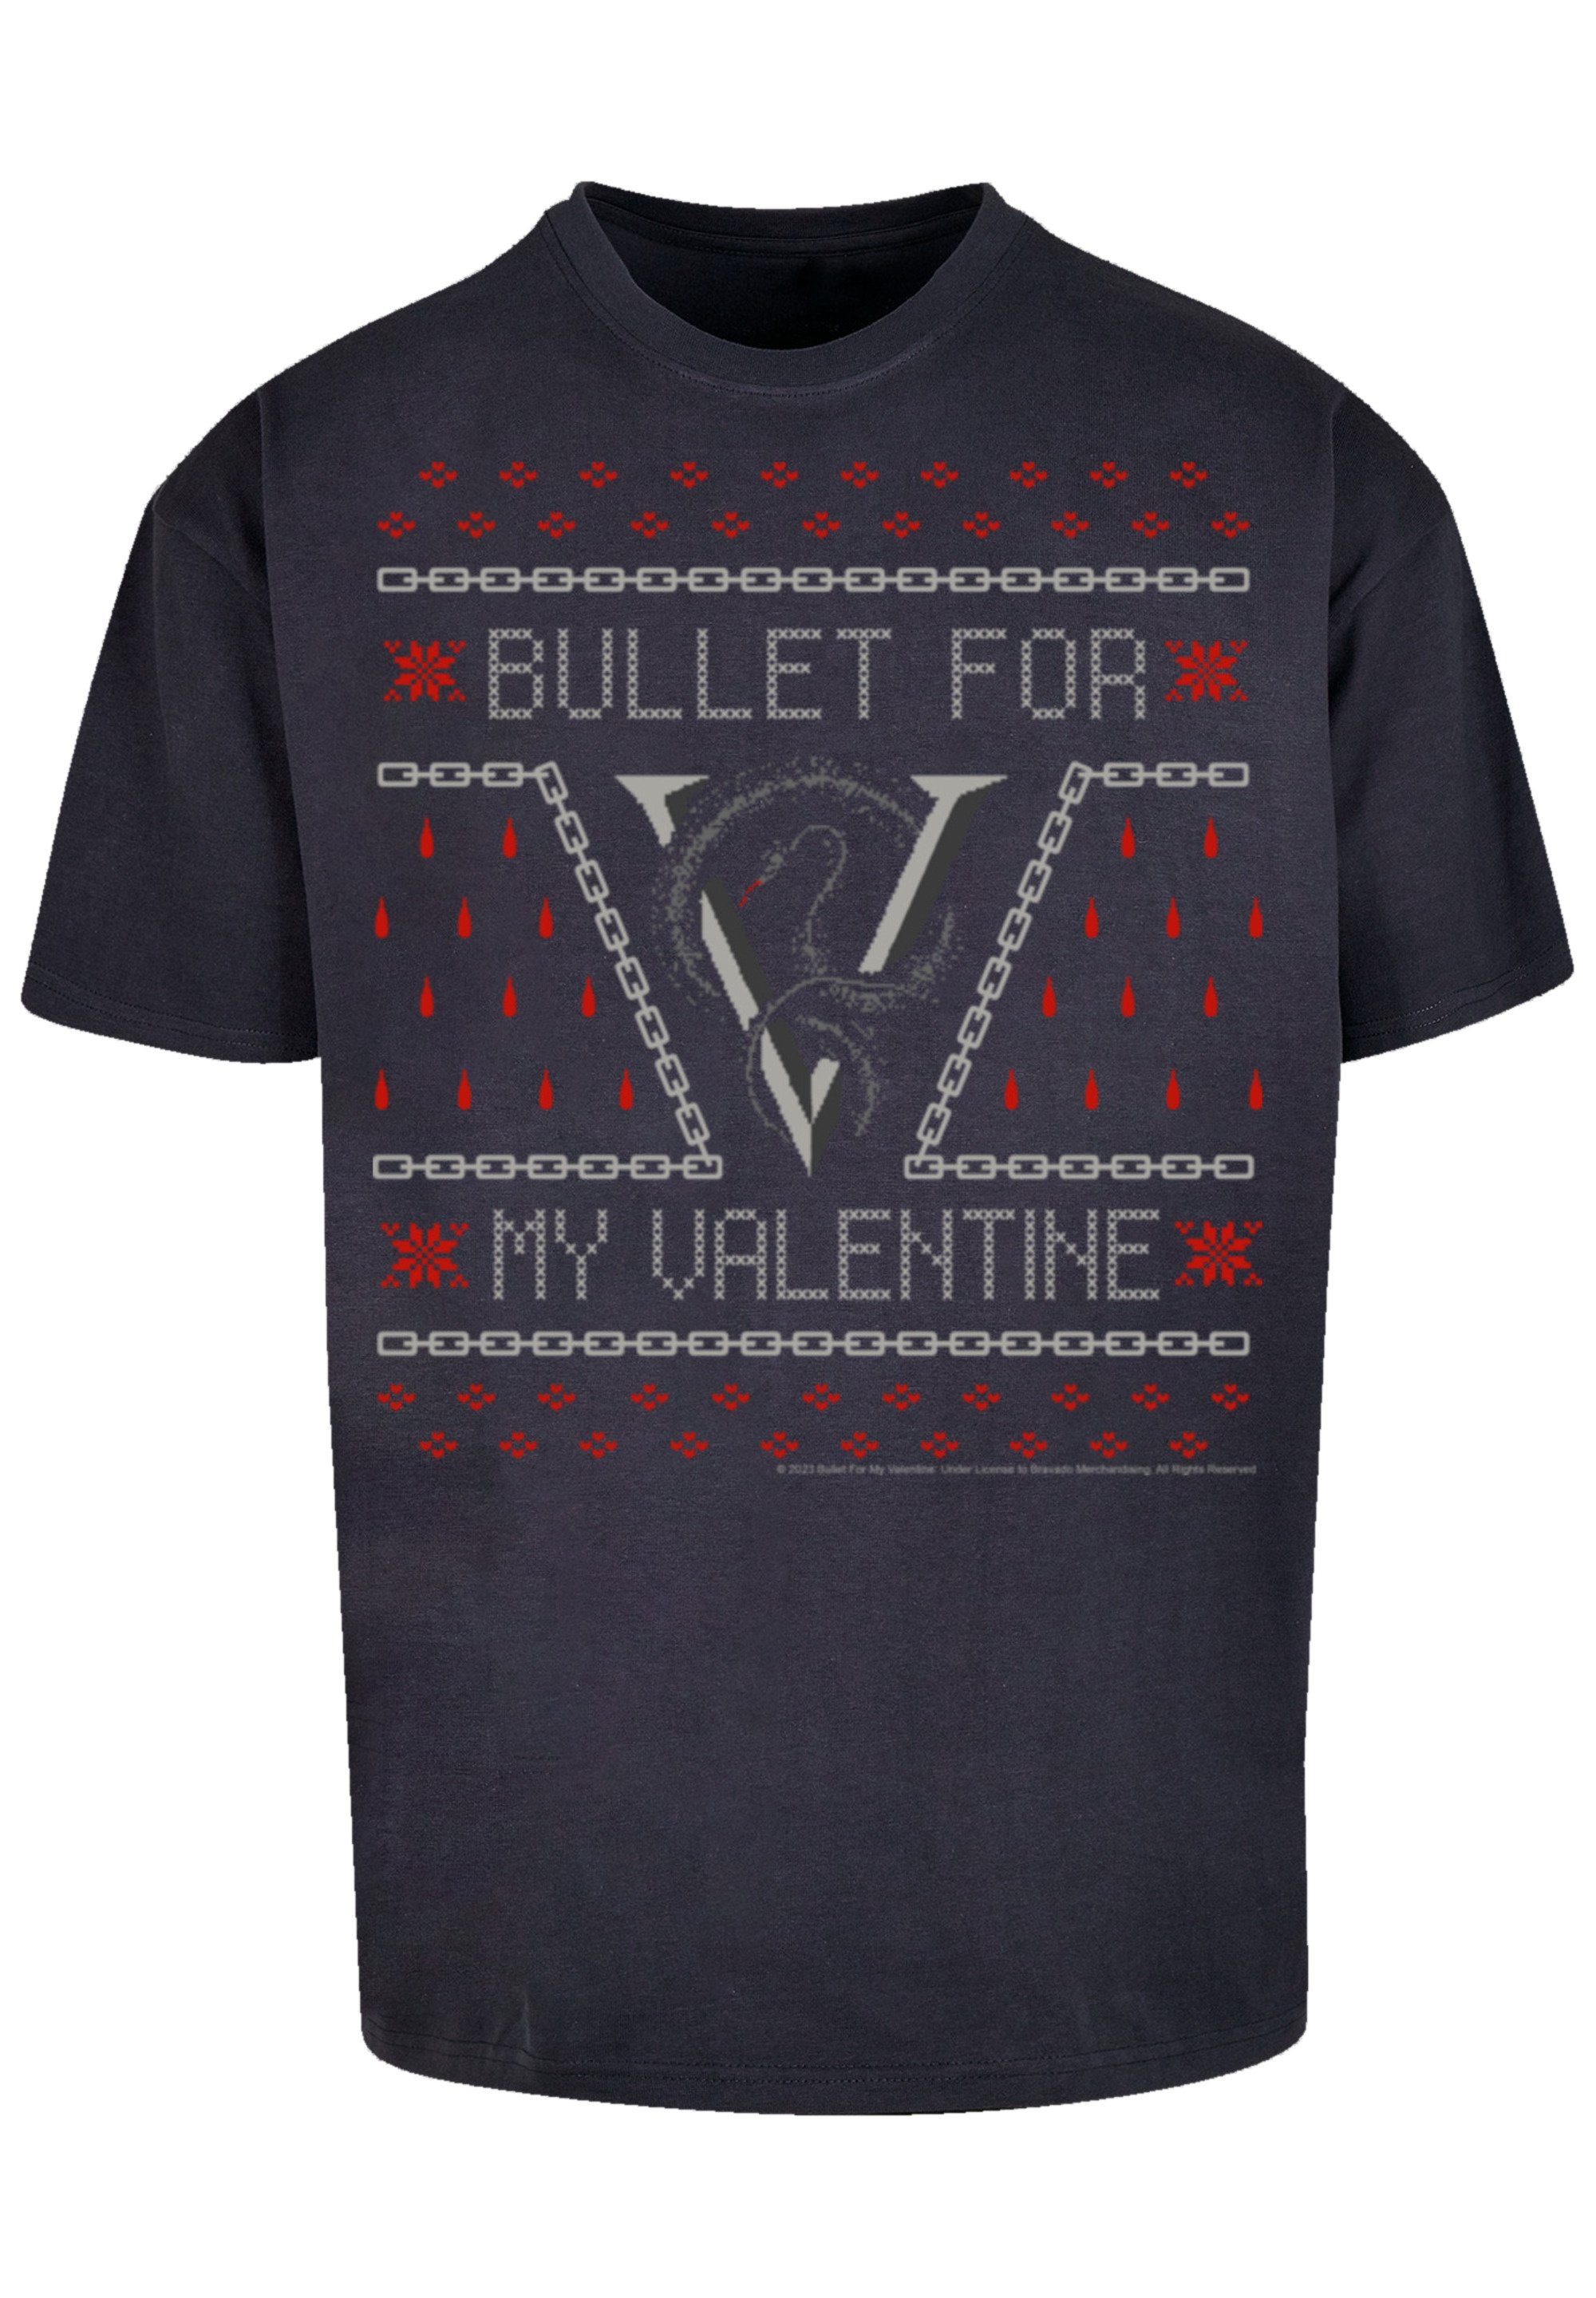 Band F4NT4STIC for T-Shirt Band Bullet Qualität, my Christmas navy Premium Rock-Musik, Valentine Metal